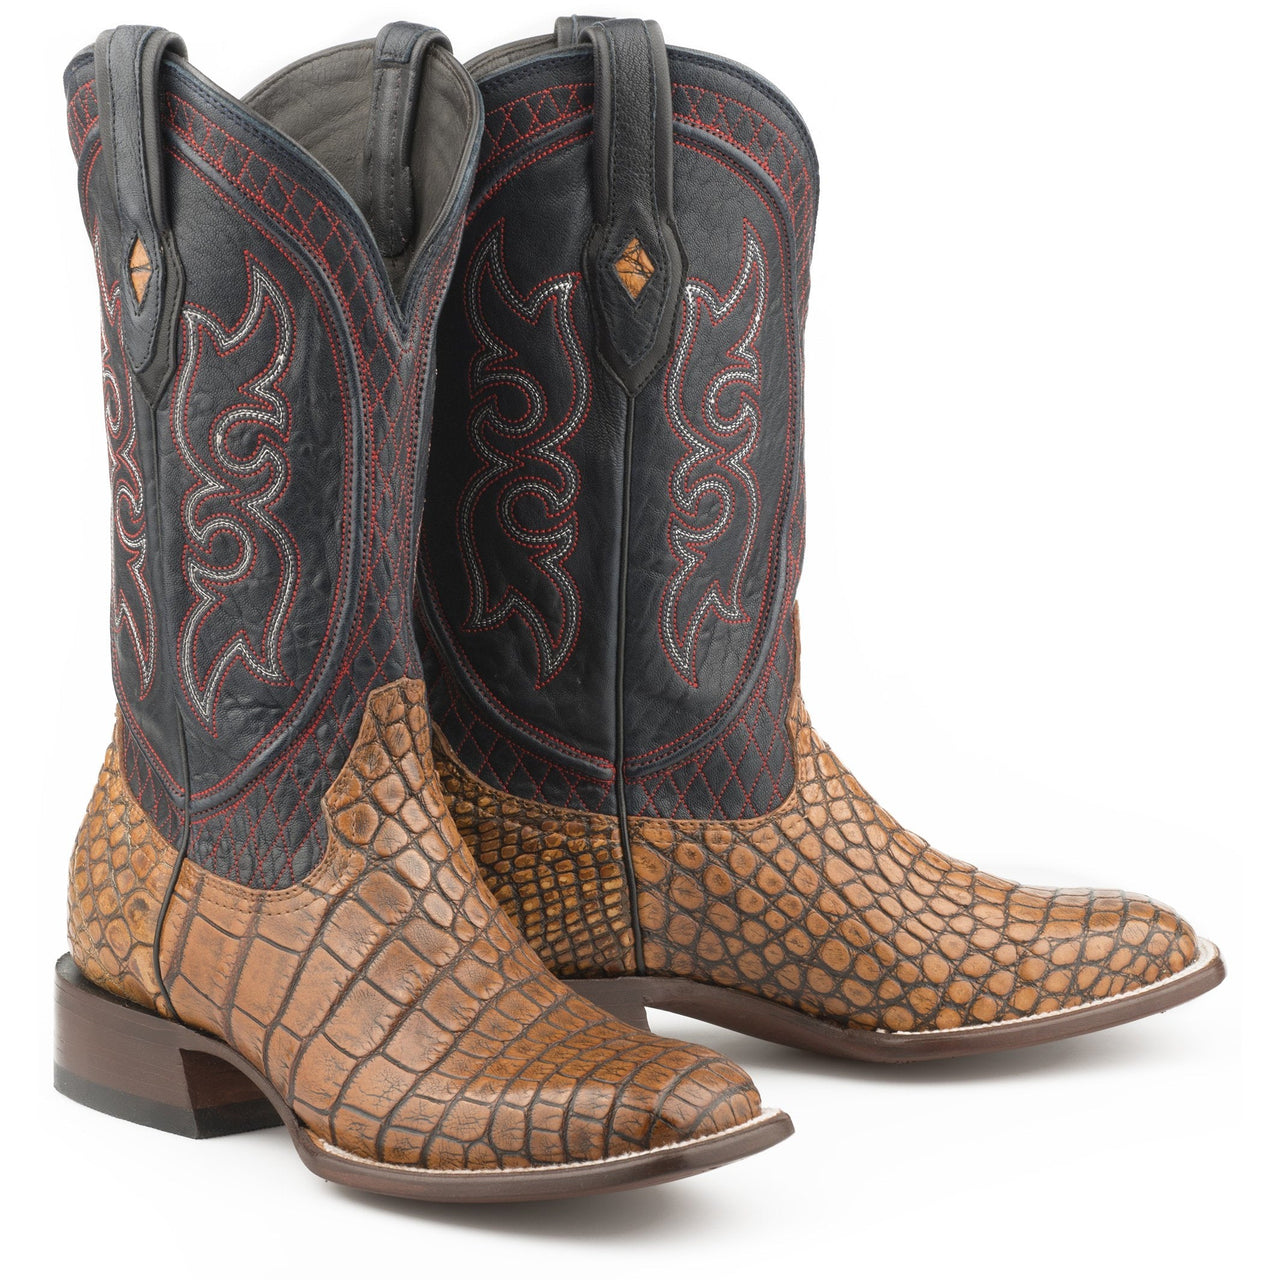 Men's Stetson Roundup Taupe Alligator Boots Handcrafted JBS Collection Honey - yeehawcowboy